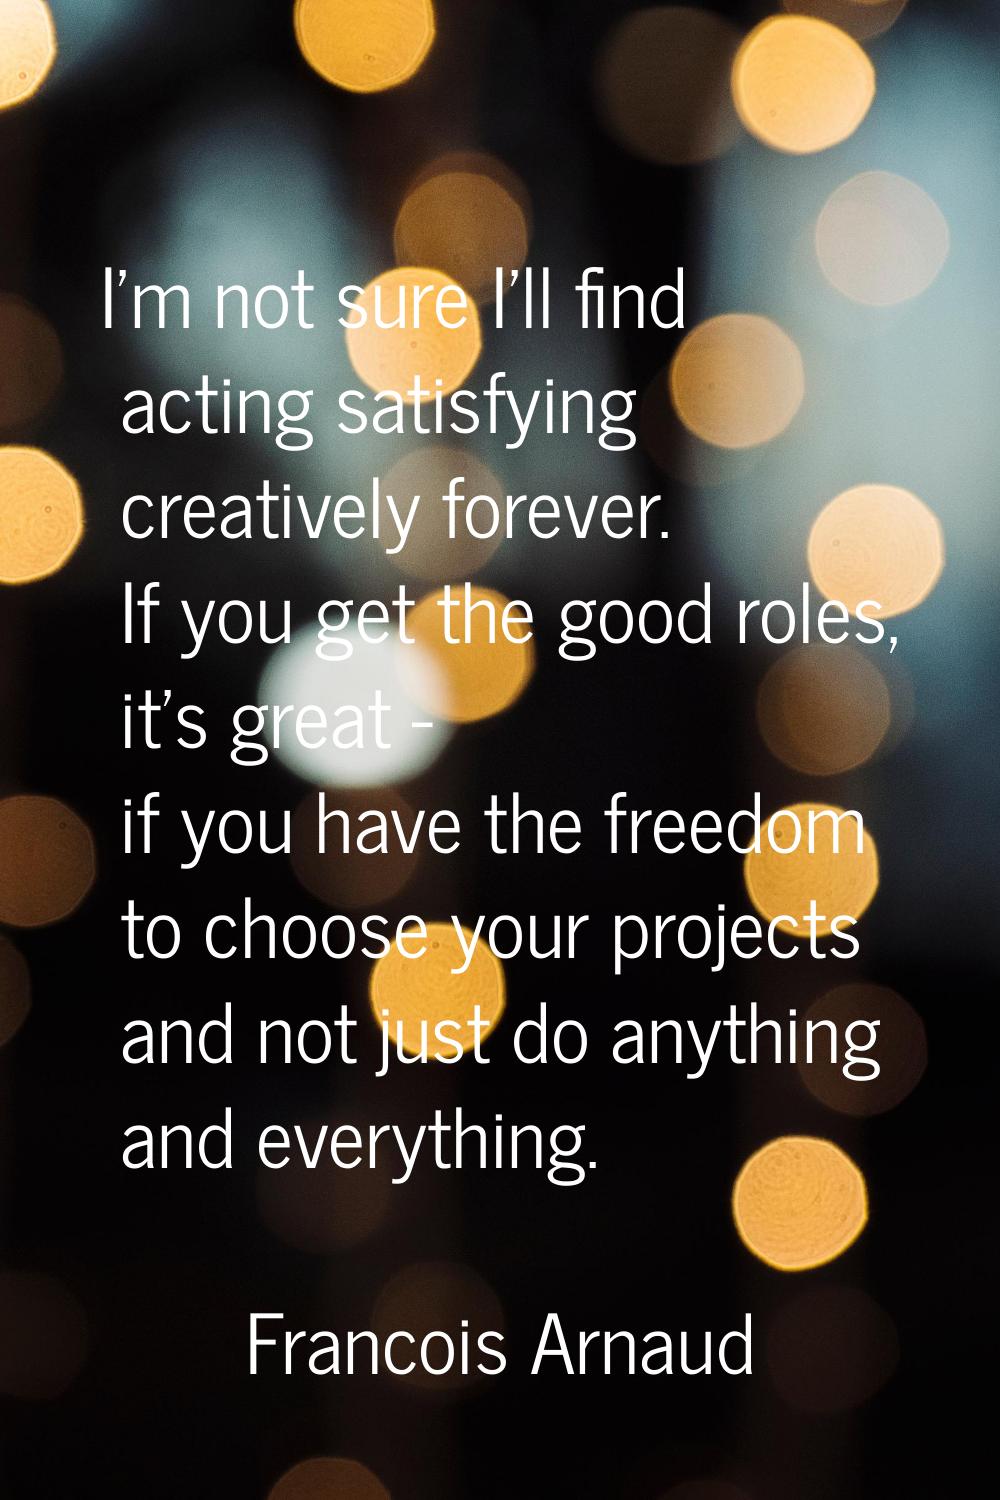 I'm not sure I'll find acting satisfying creatively forever. If you get the good roles, it's great 